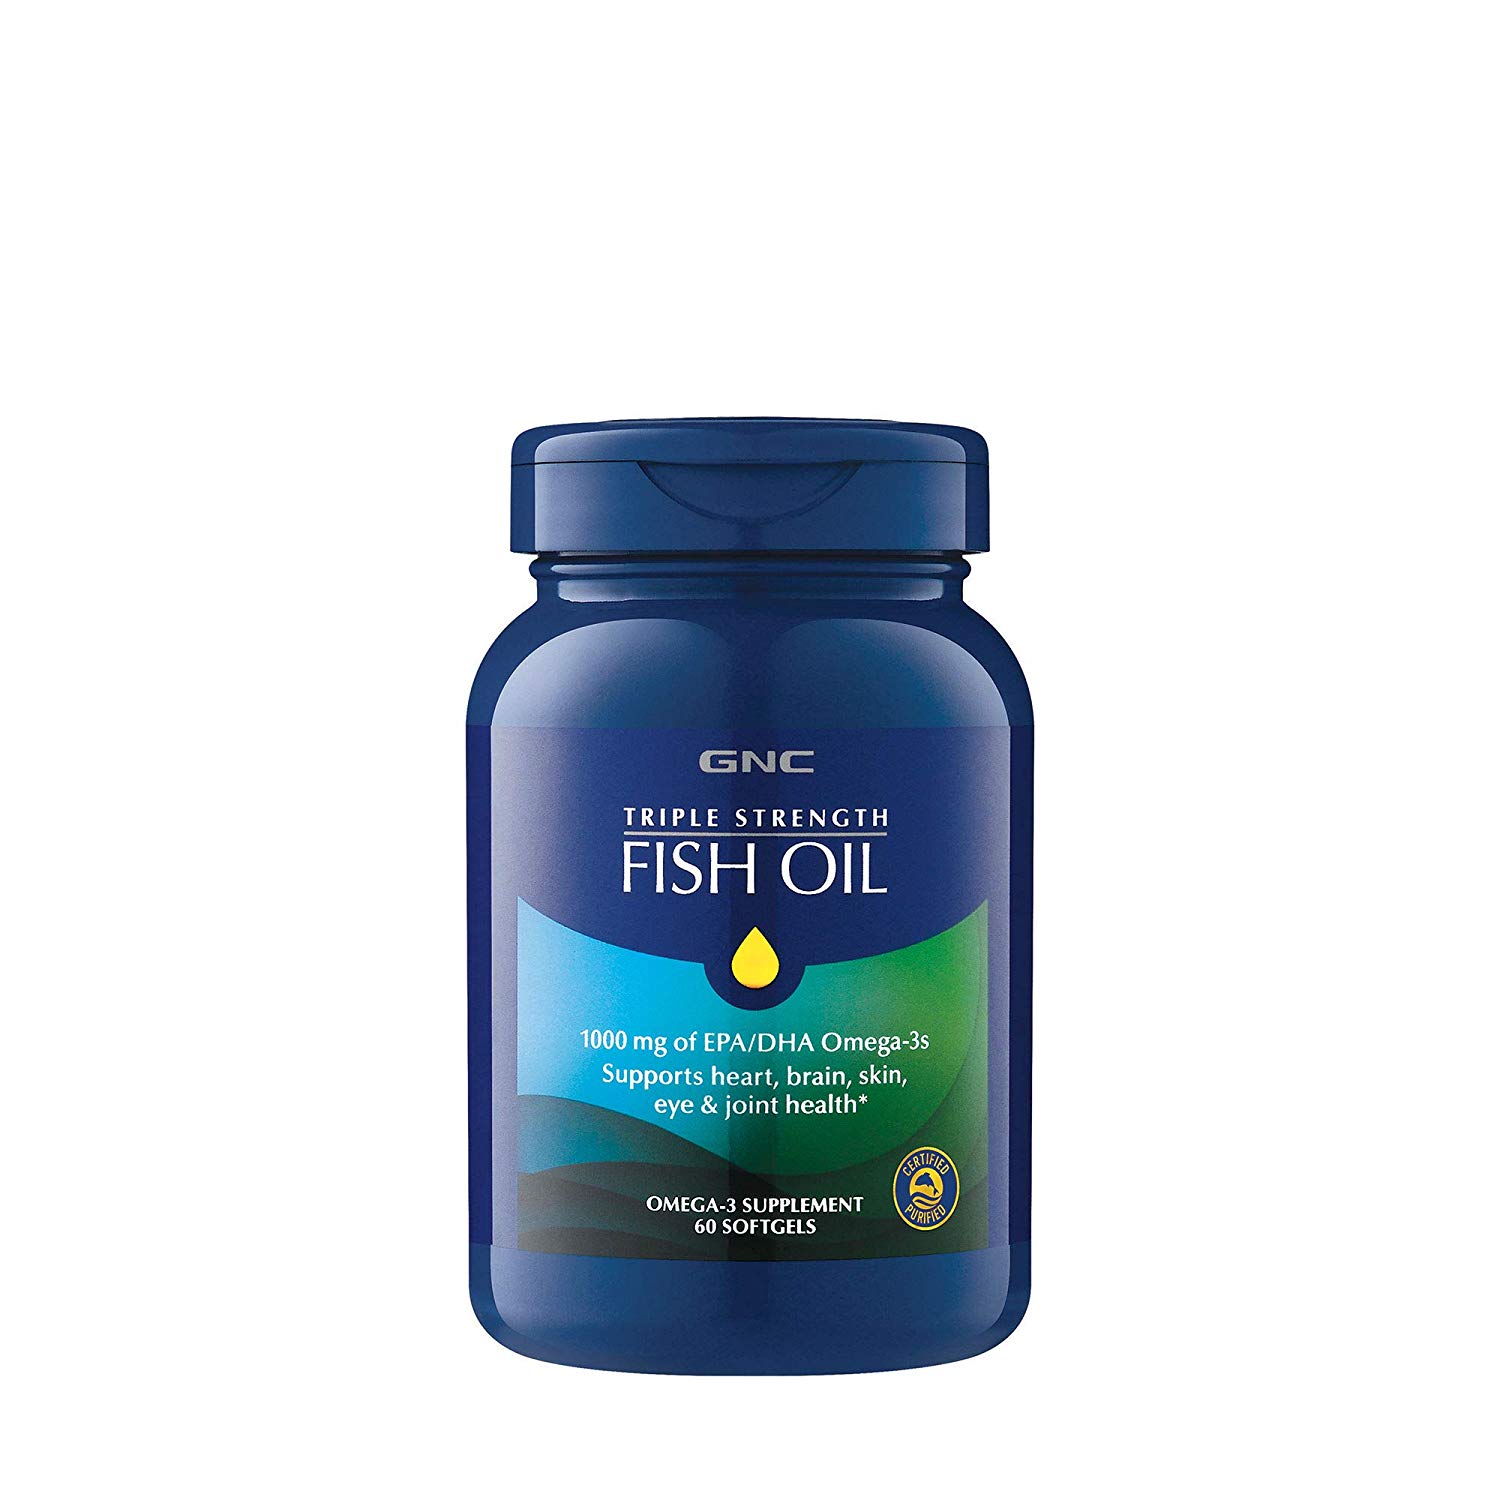 10 Best Fish Oil in India - 2020 | Full Review And Buyer's Guide